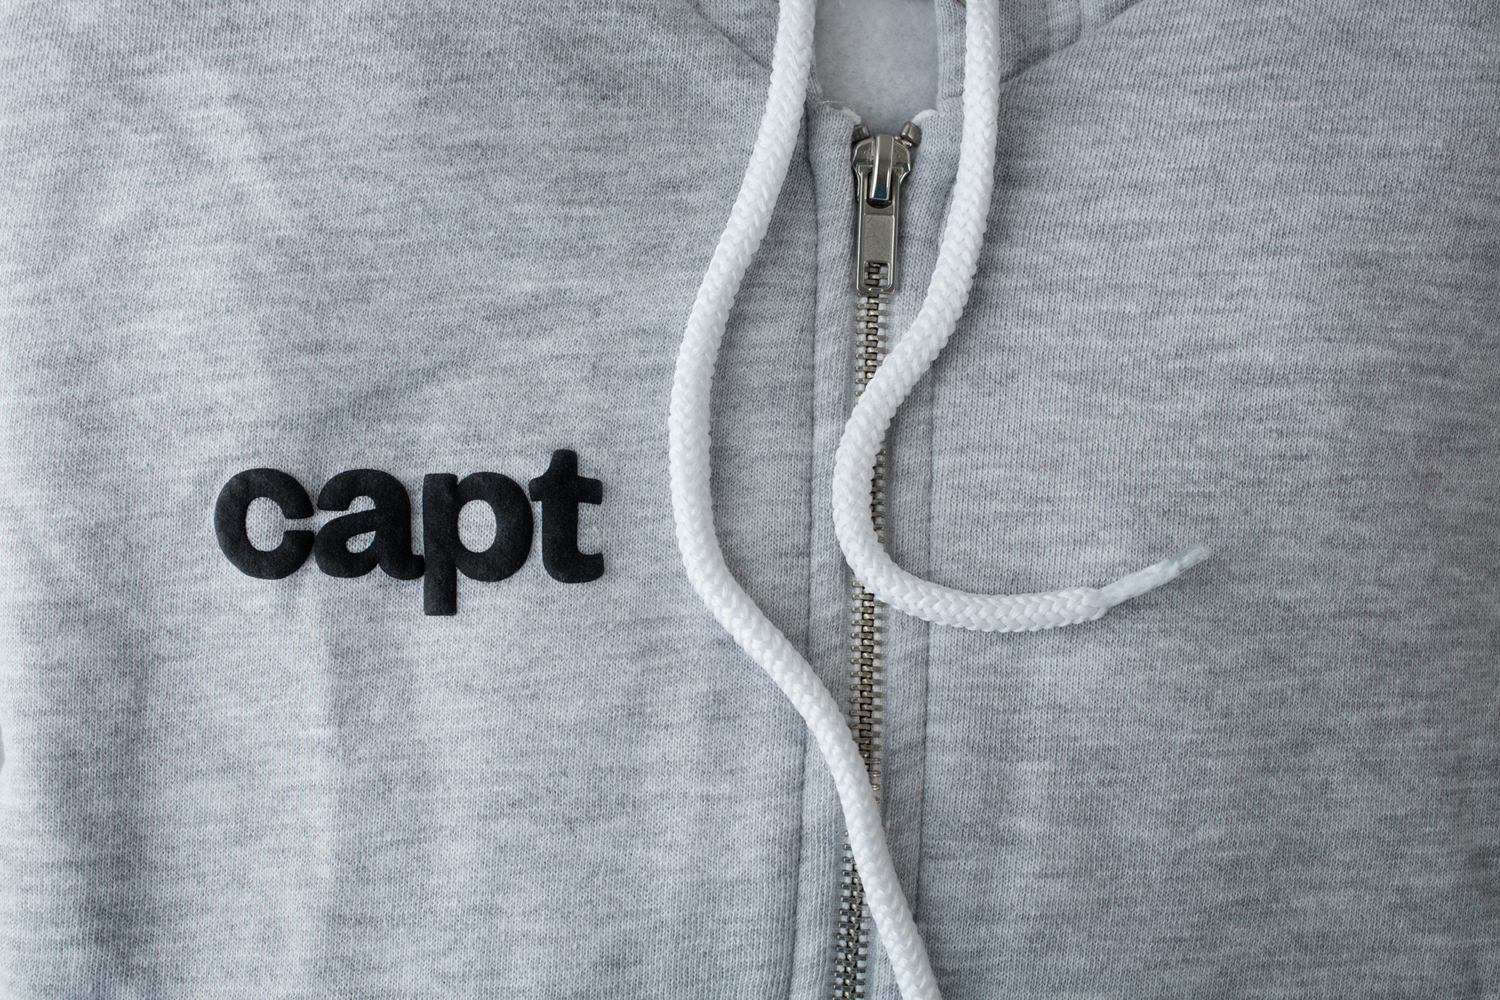 Branded hoodie designed by Bunch for San Francisco based tech start-up Capt